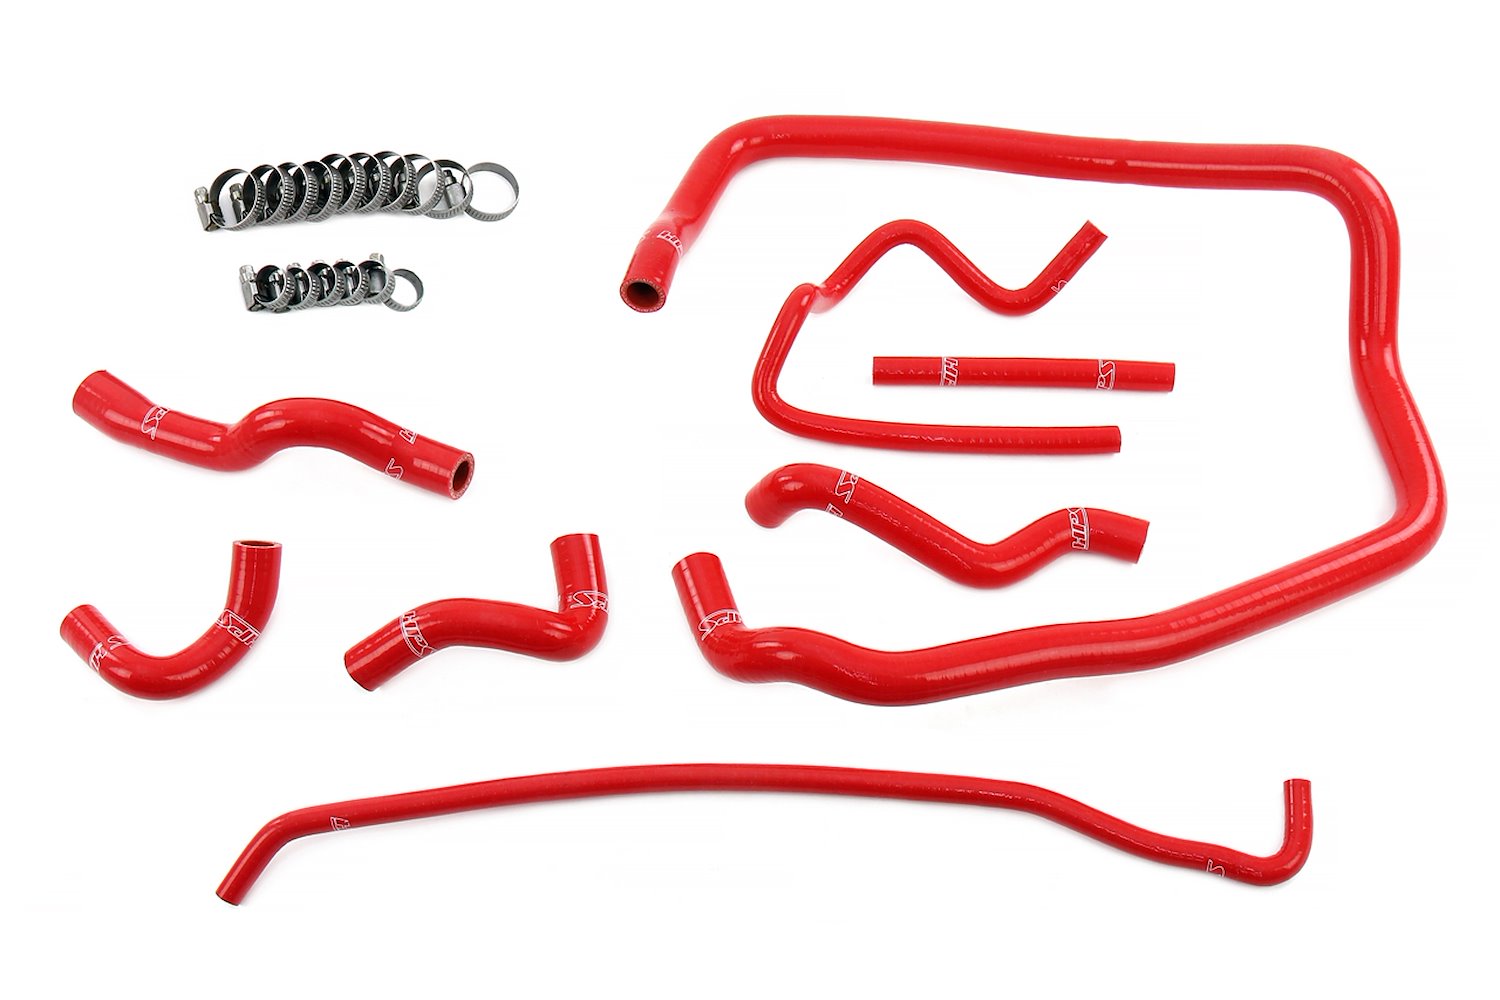 57-2138-RED Coolant Hose Kit, 3-Ply Reinforced Silicone, Replaces Heater, Throttle Body, Expansion Tank Hoses